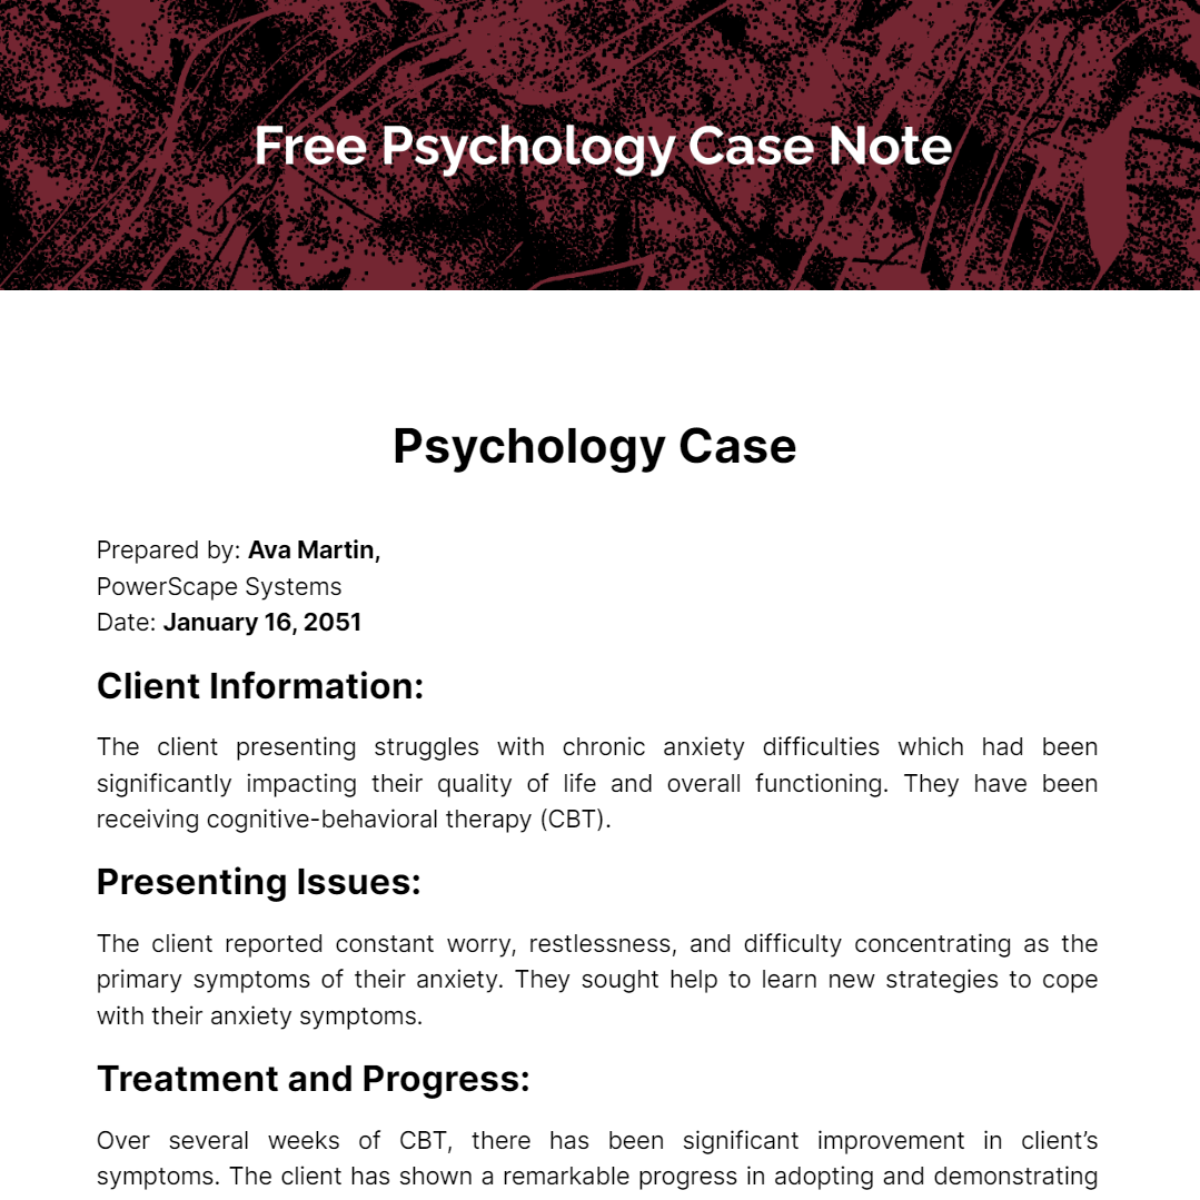 Free Psychology Case Note Template